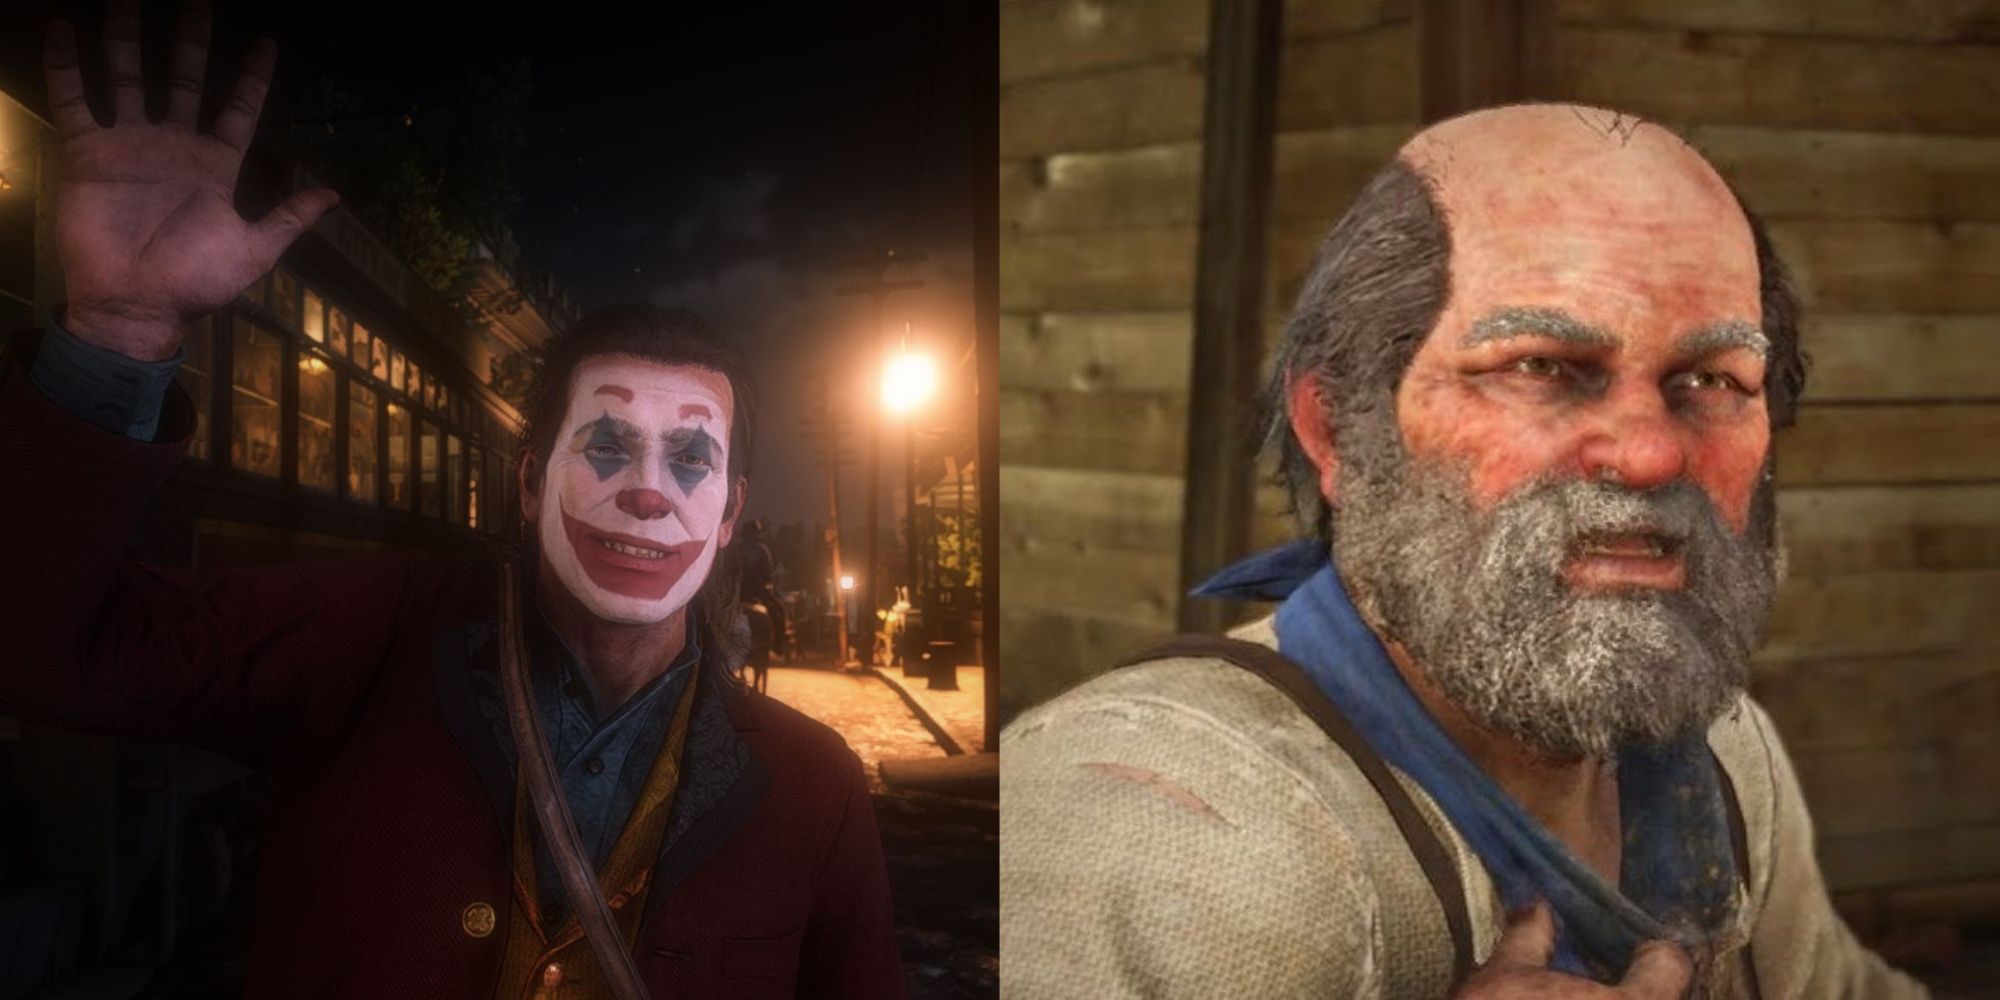 A split-image of a modded Arthur as the Arthur Fleck 2019 Joker, and Uncle without his hat.